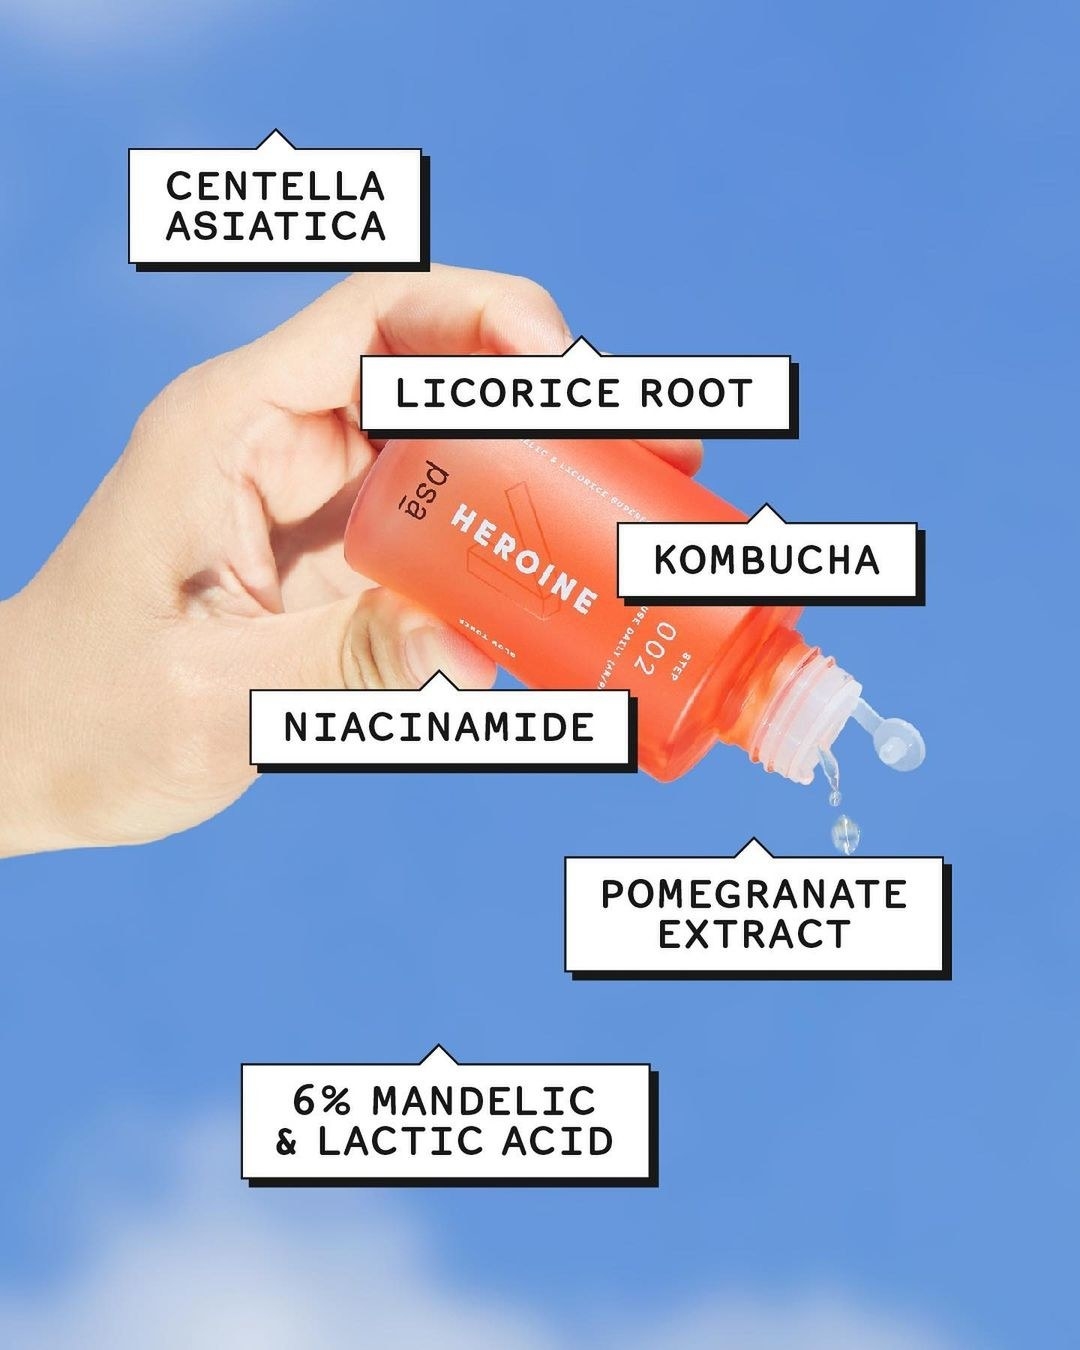 The bottle of product with text highlighting ingredients mentioend above